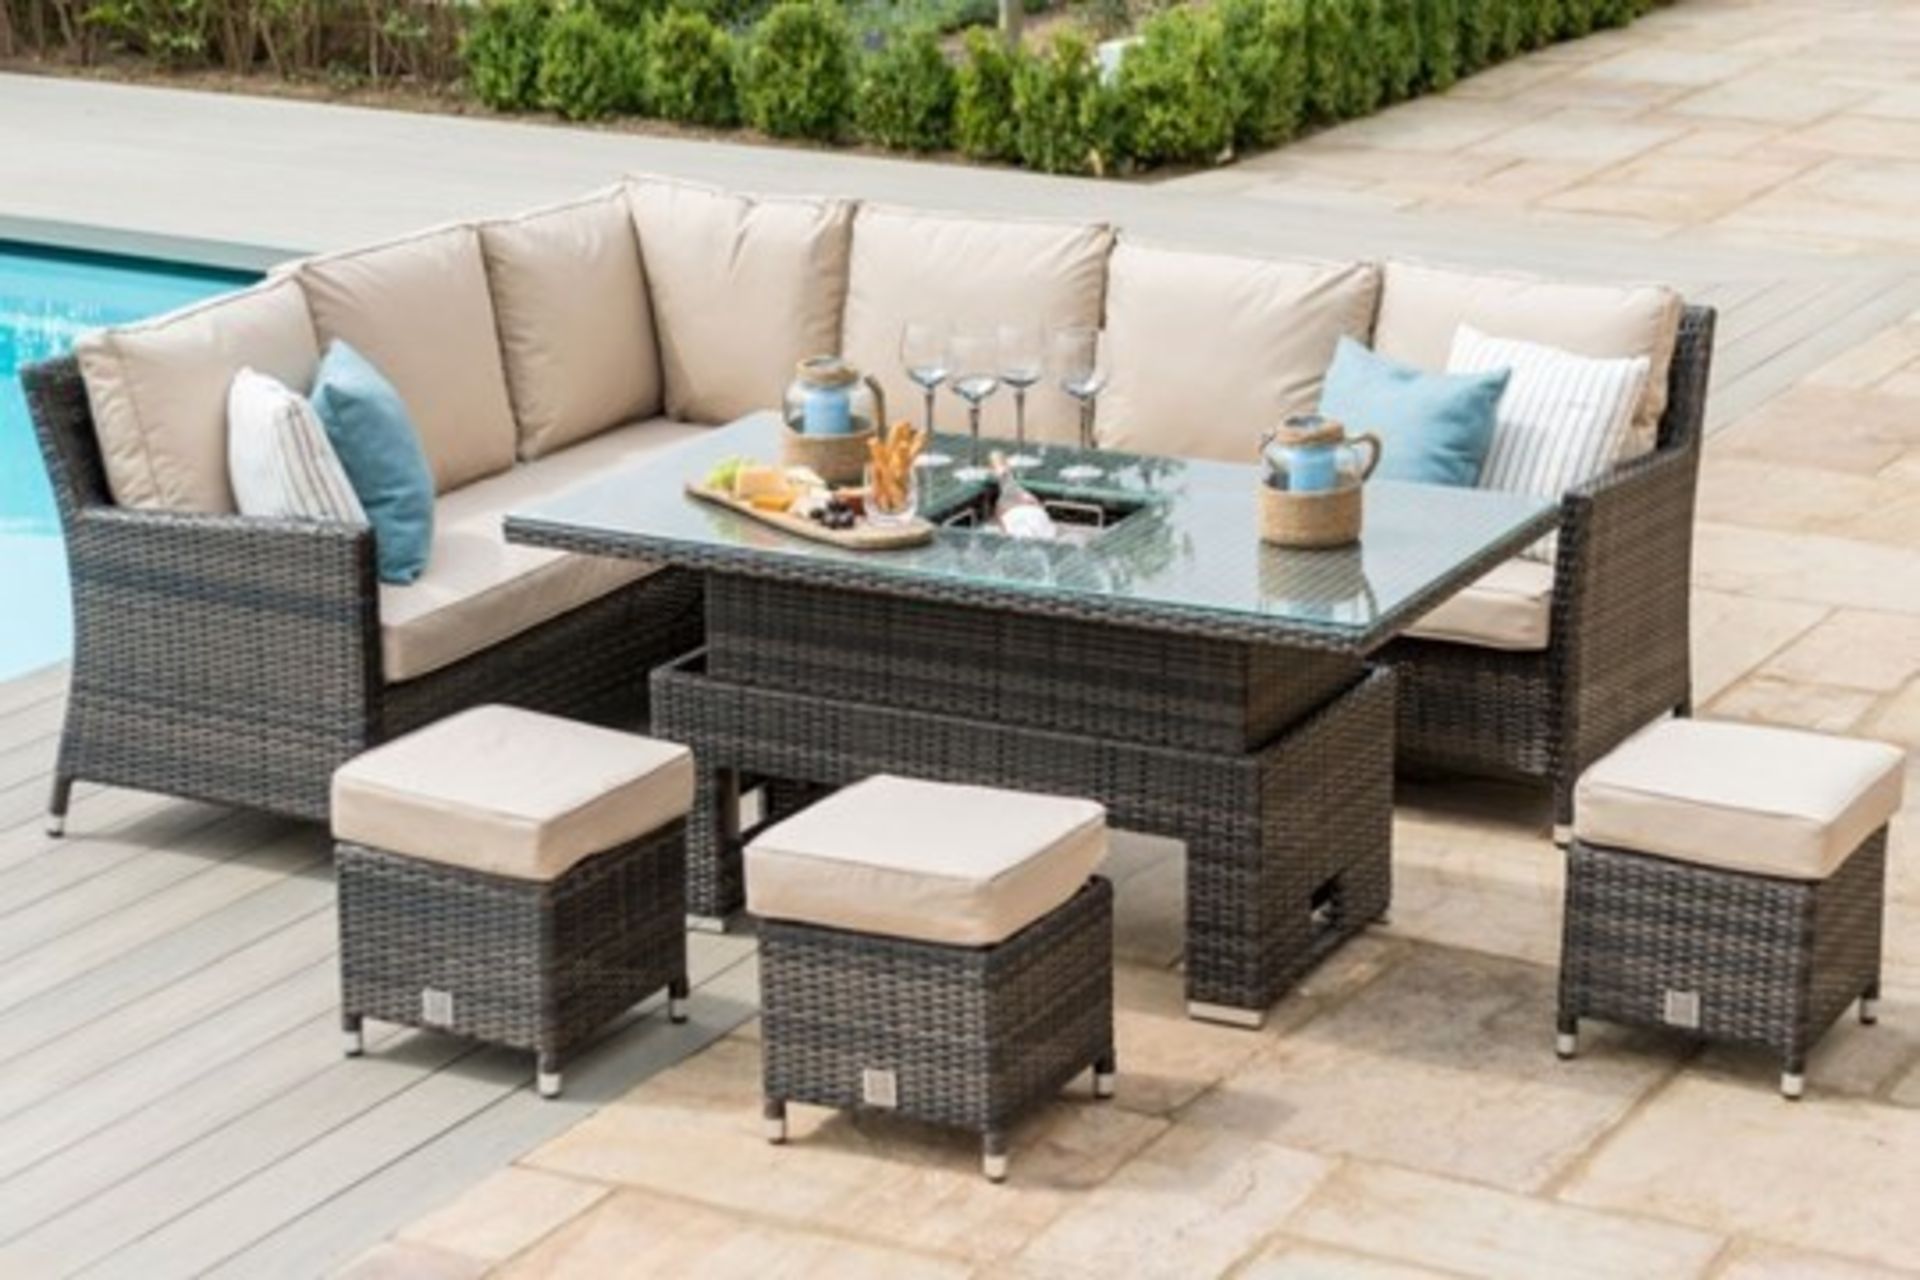 Rattan Venice Corner Outdoor Dining Set With Ice Bucket And Rising Table (Brown) *BRAND NEW* - Image 3 of 4